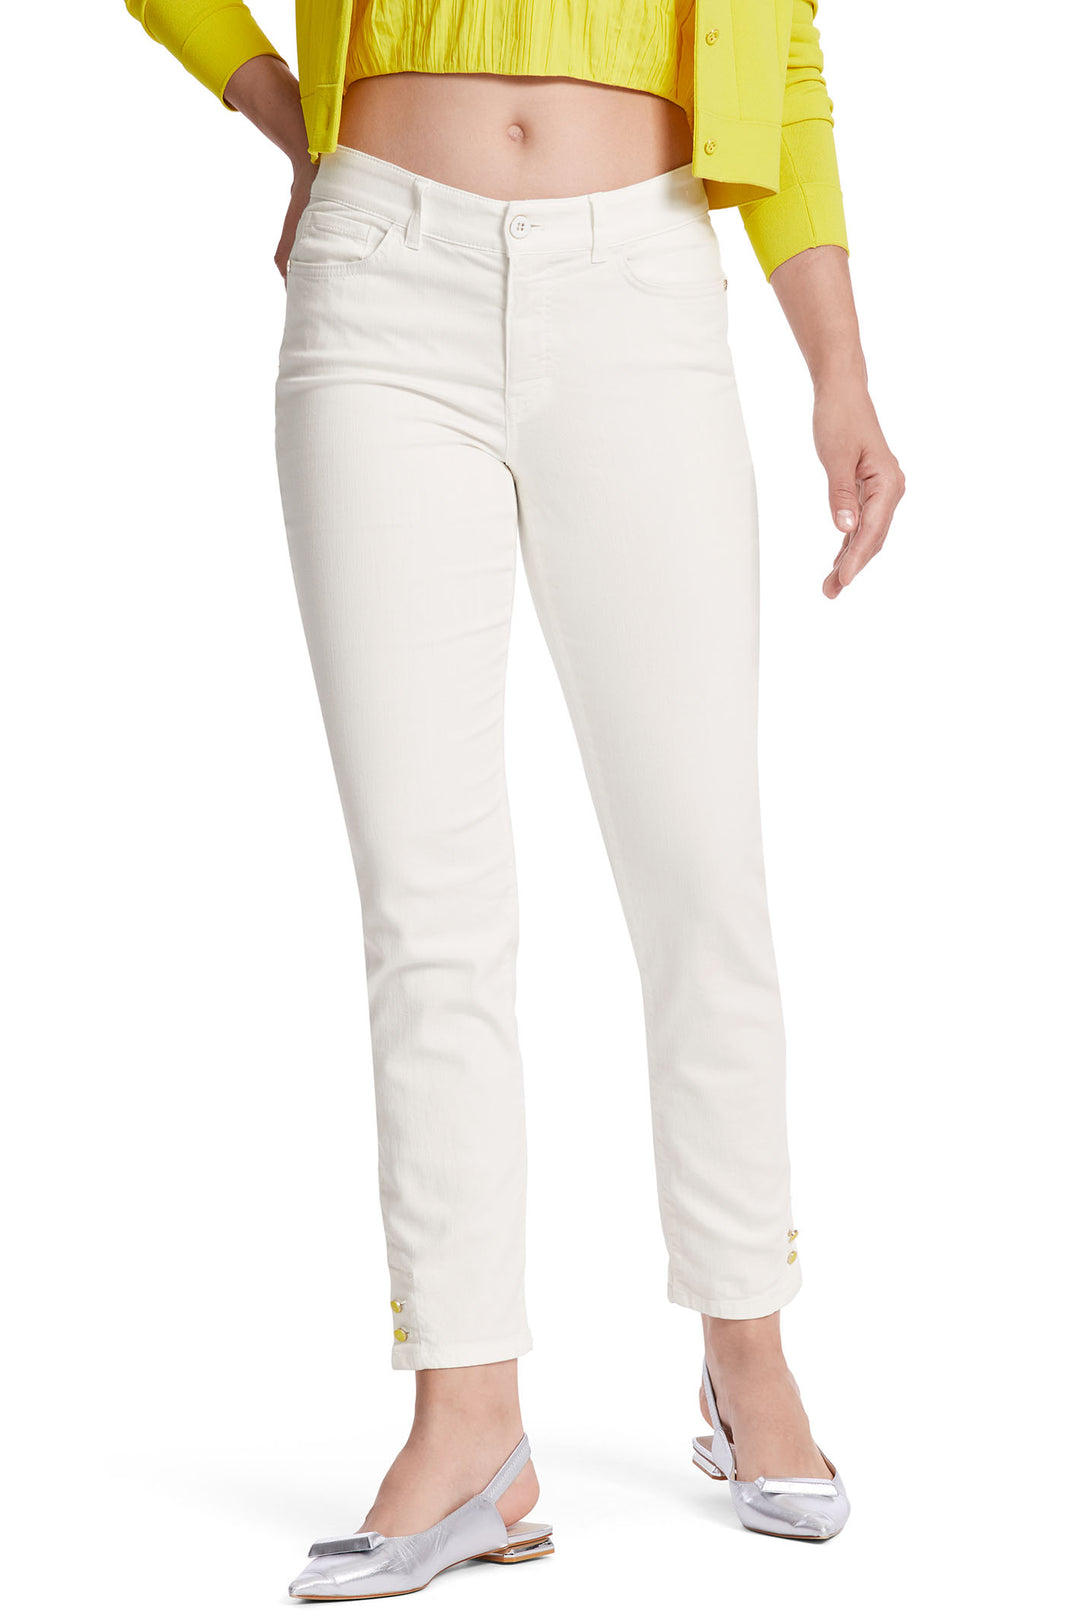 Marc Cain Collection WC 82.13 D69 110 Off White Silea Jeans - Olivia Grace Fashion